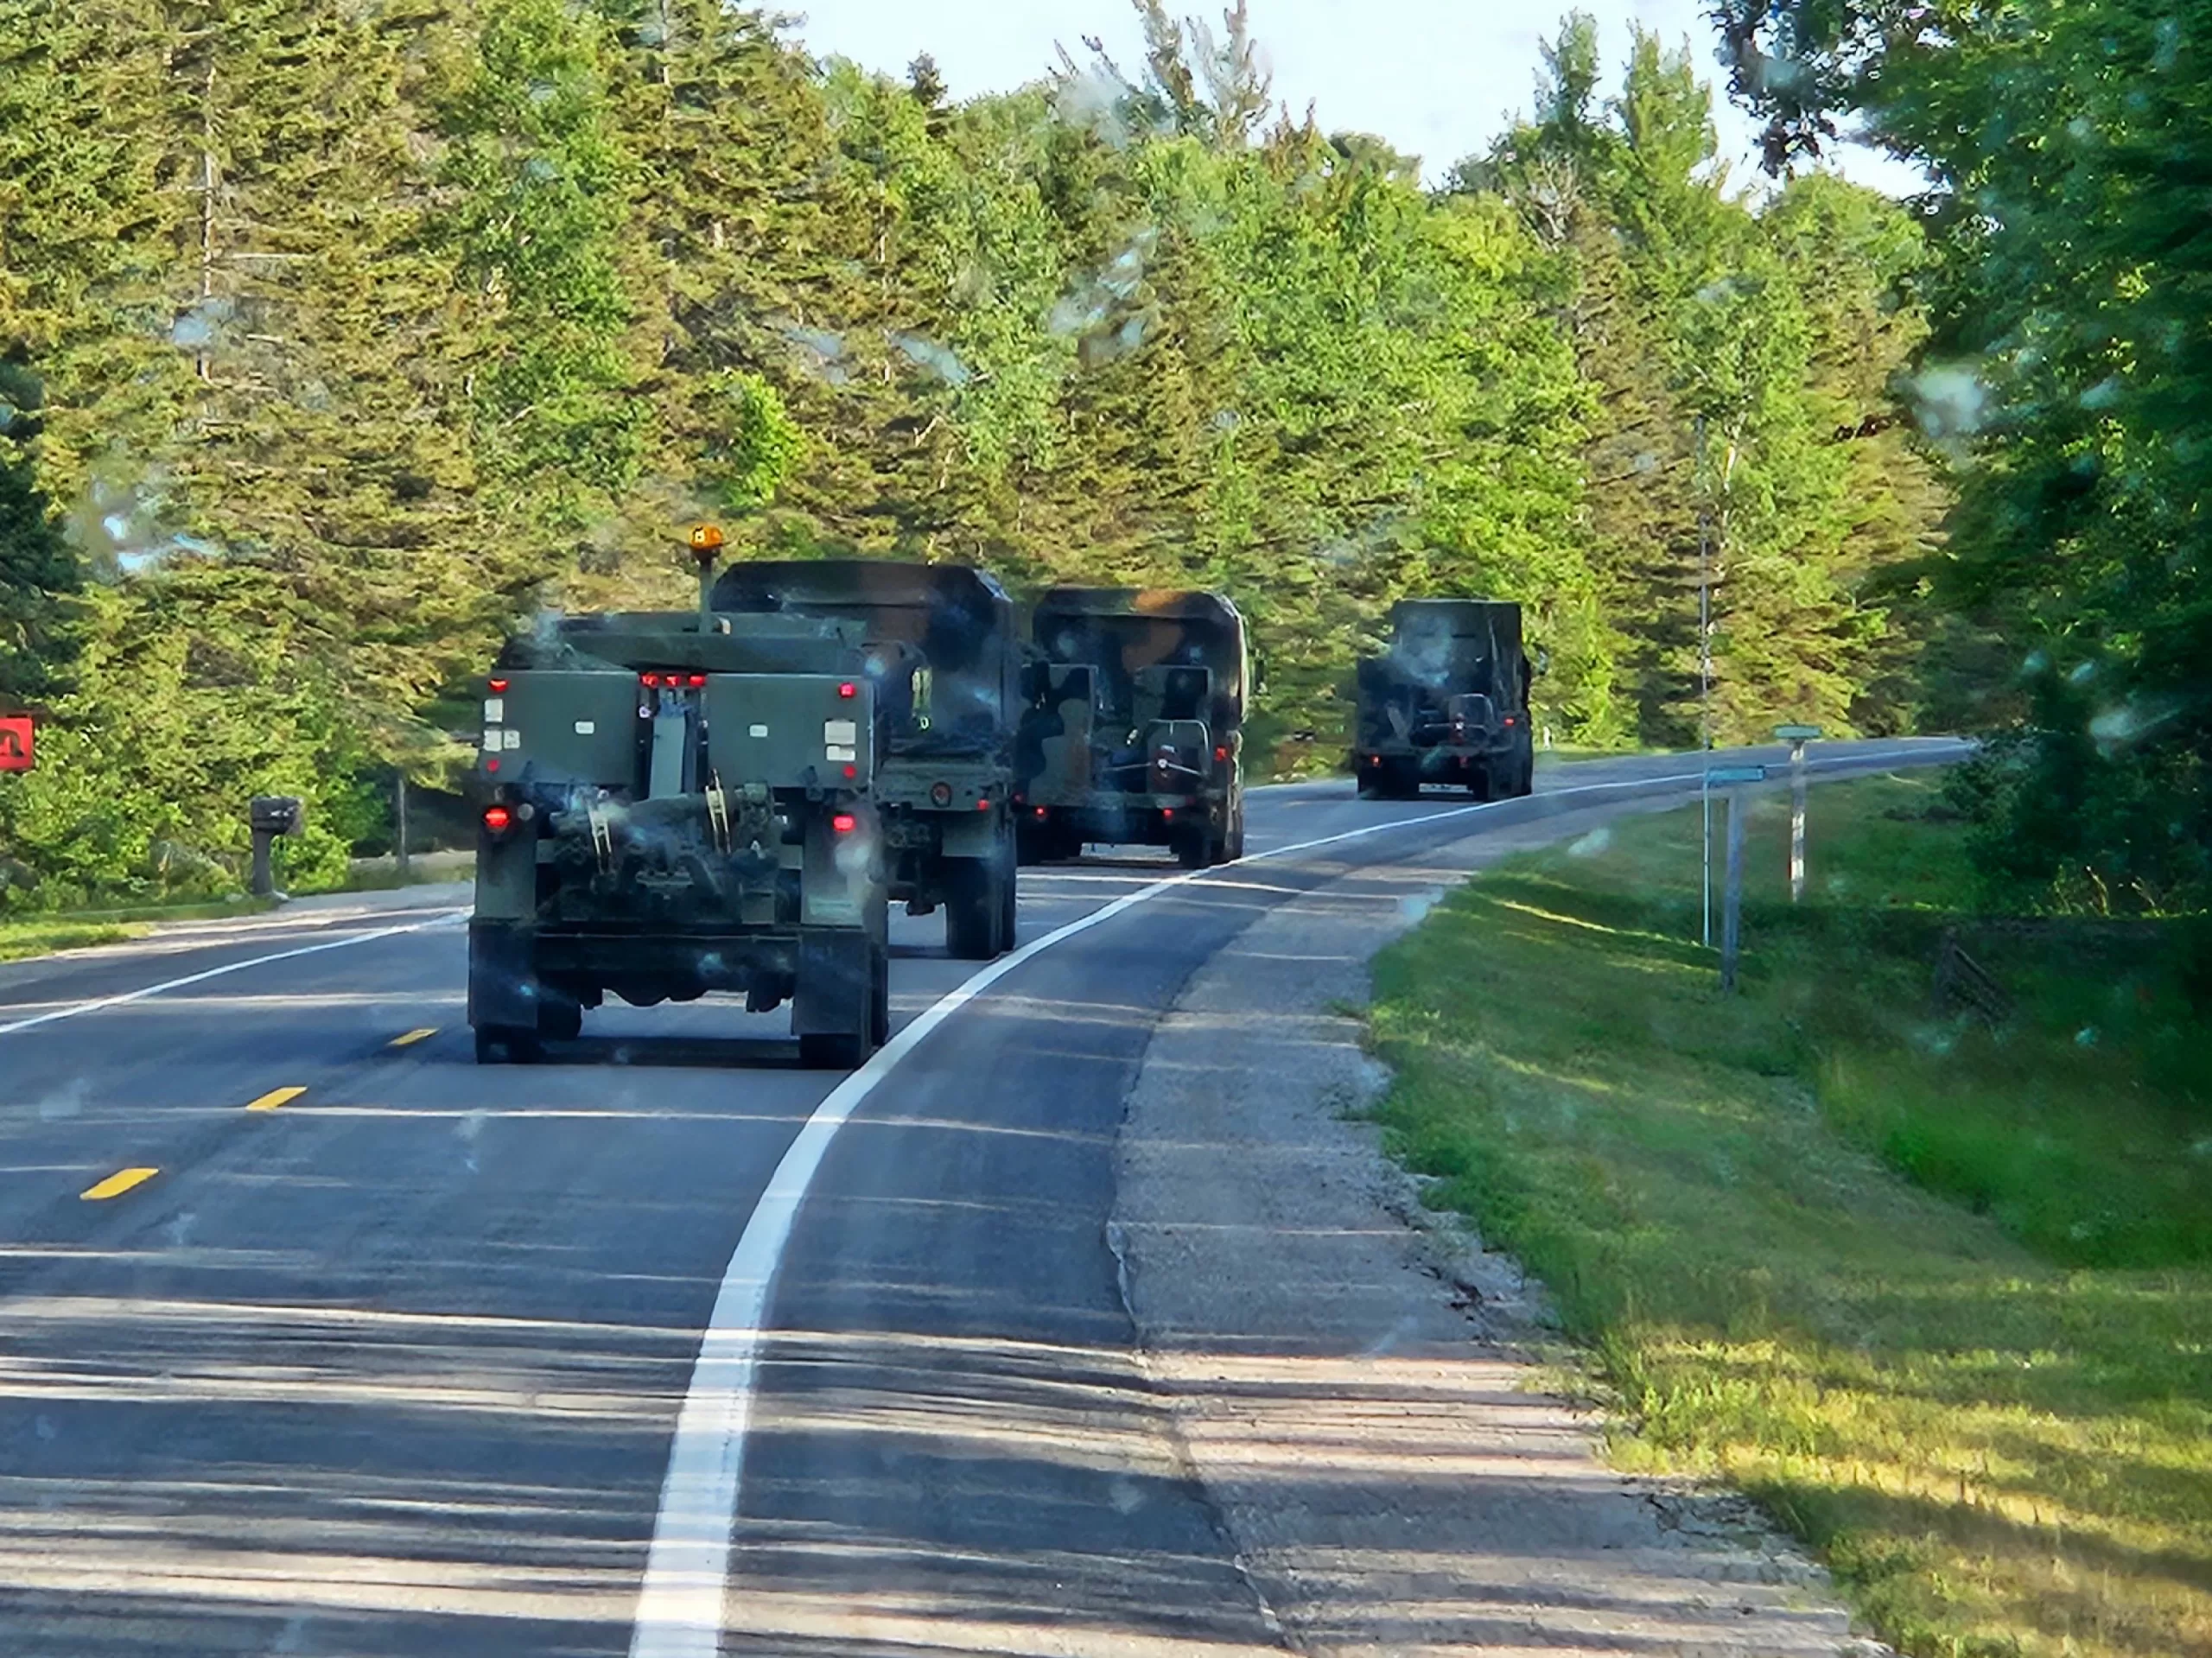 Members of the 128th Air Control Squadron of the Wisconsin Air National Guard achieved a training first by convoying more than 500 miles from Volk Field, Wis., to Alpena Combat Readiness Training Center, Mich., July 8 to train on new forward operating location tactics and equipment. This two-week training improves the unit’s overall readiness for a potential near-peer conflict. Wisconsin National Guard photo